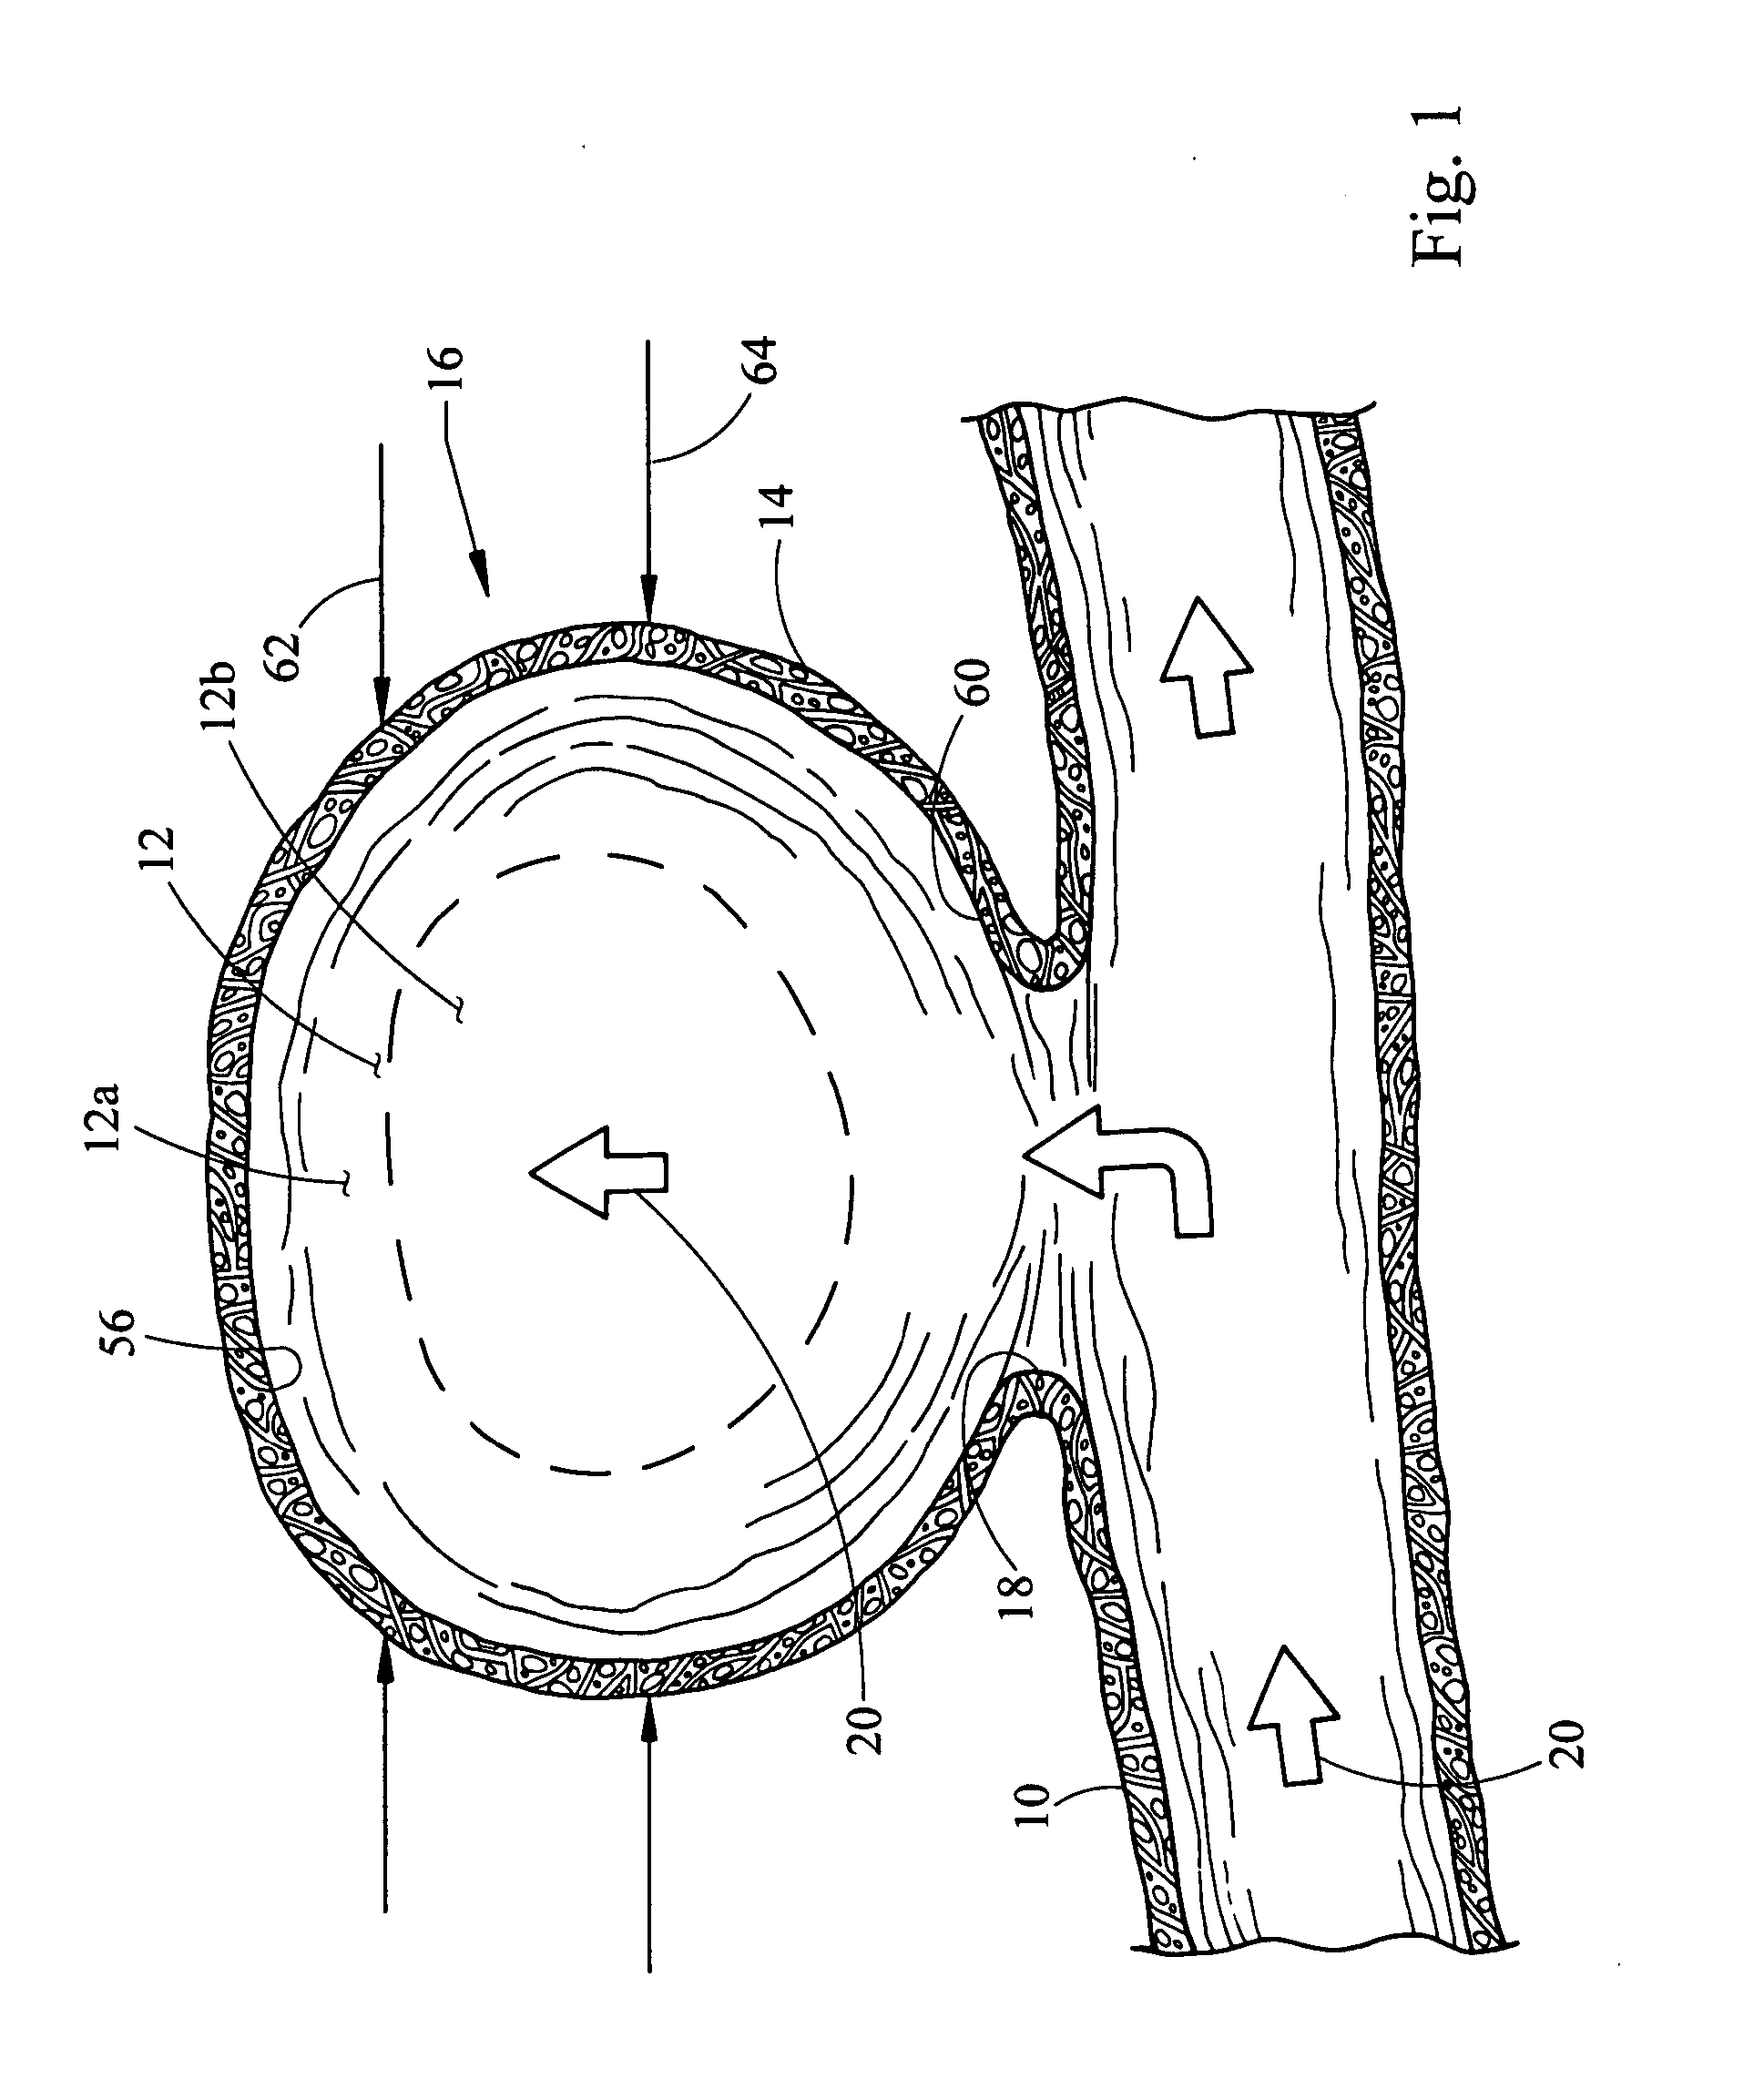 Aneurysm coil and method of assembly